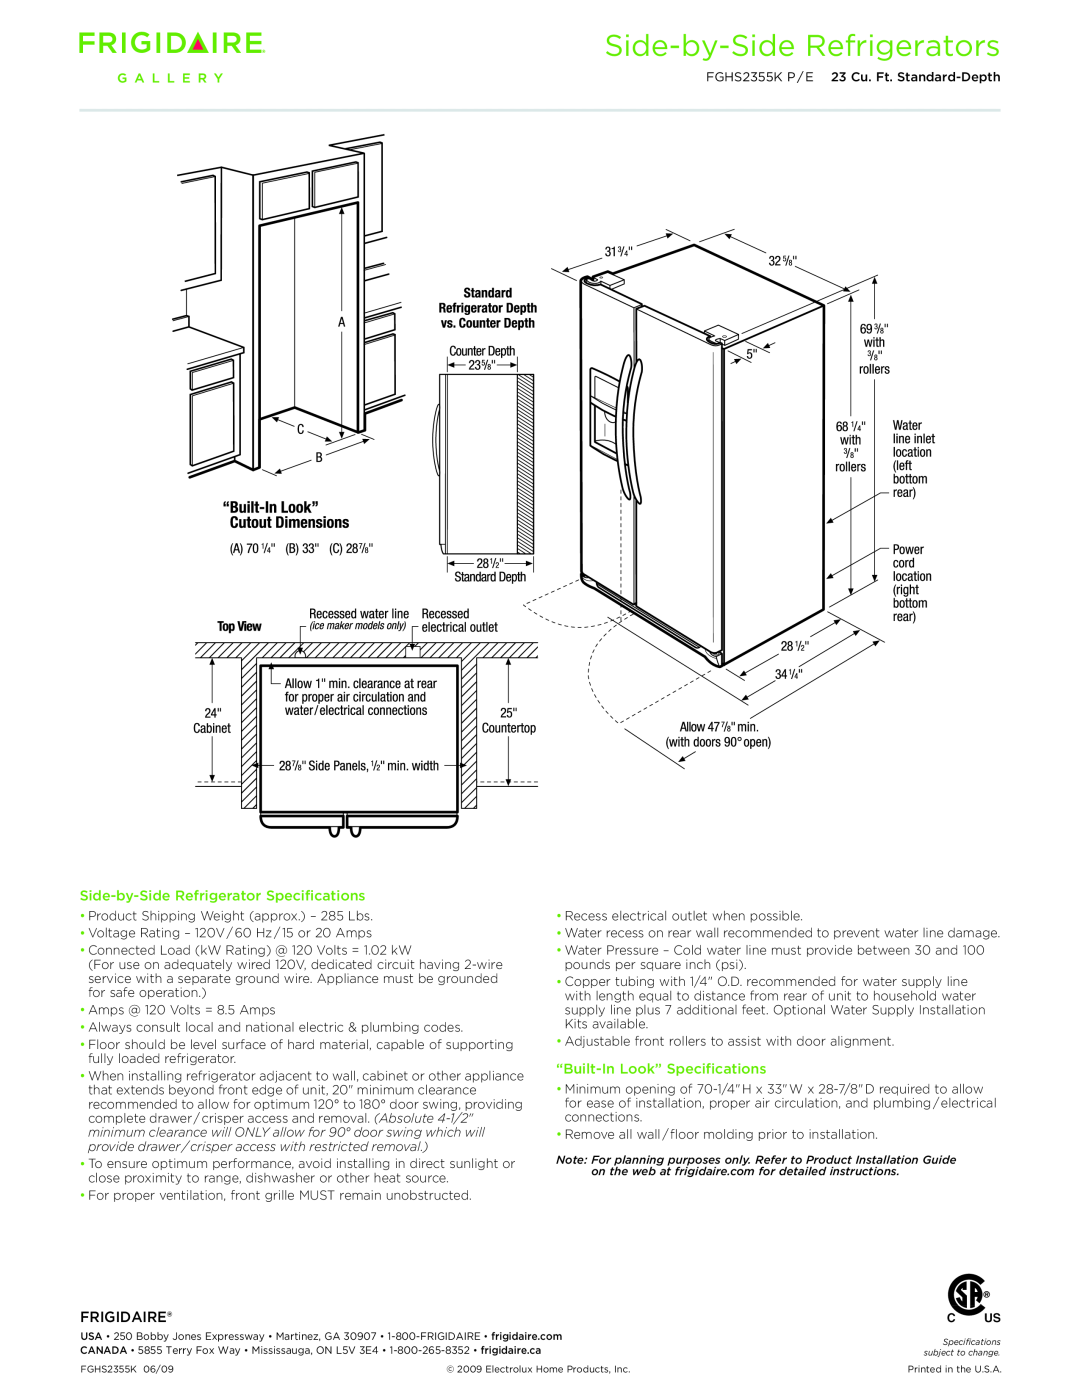 Frigidaire FGHS2355KE, FGHS2355KP Side-by-SideRefrigerator Specifications, “Built-InLook” Specifications, Frigidaire 